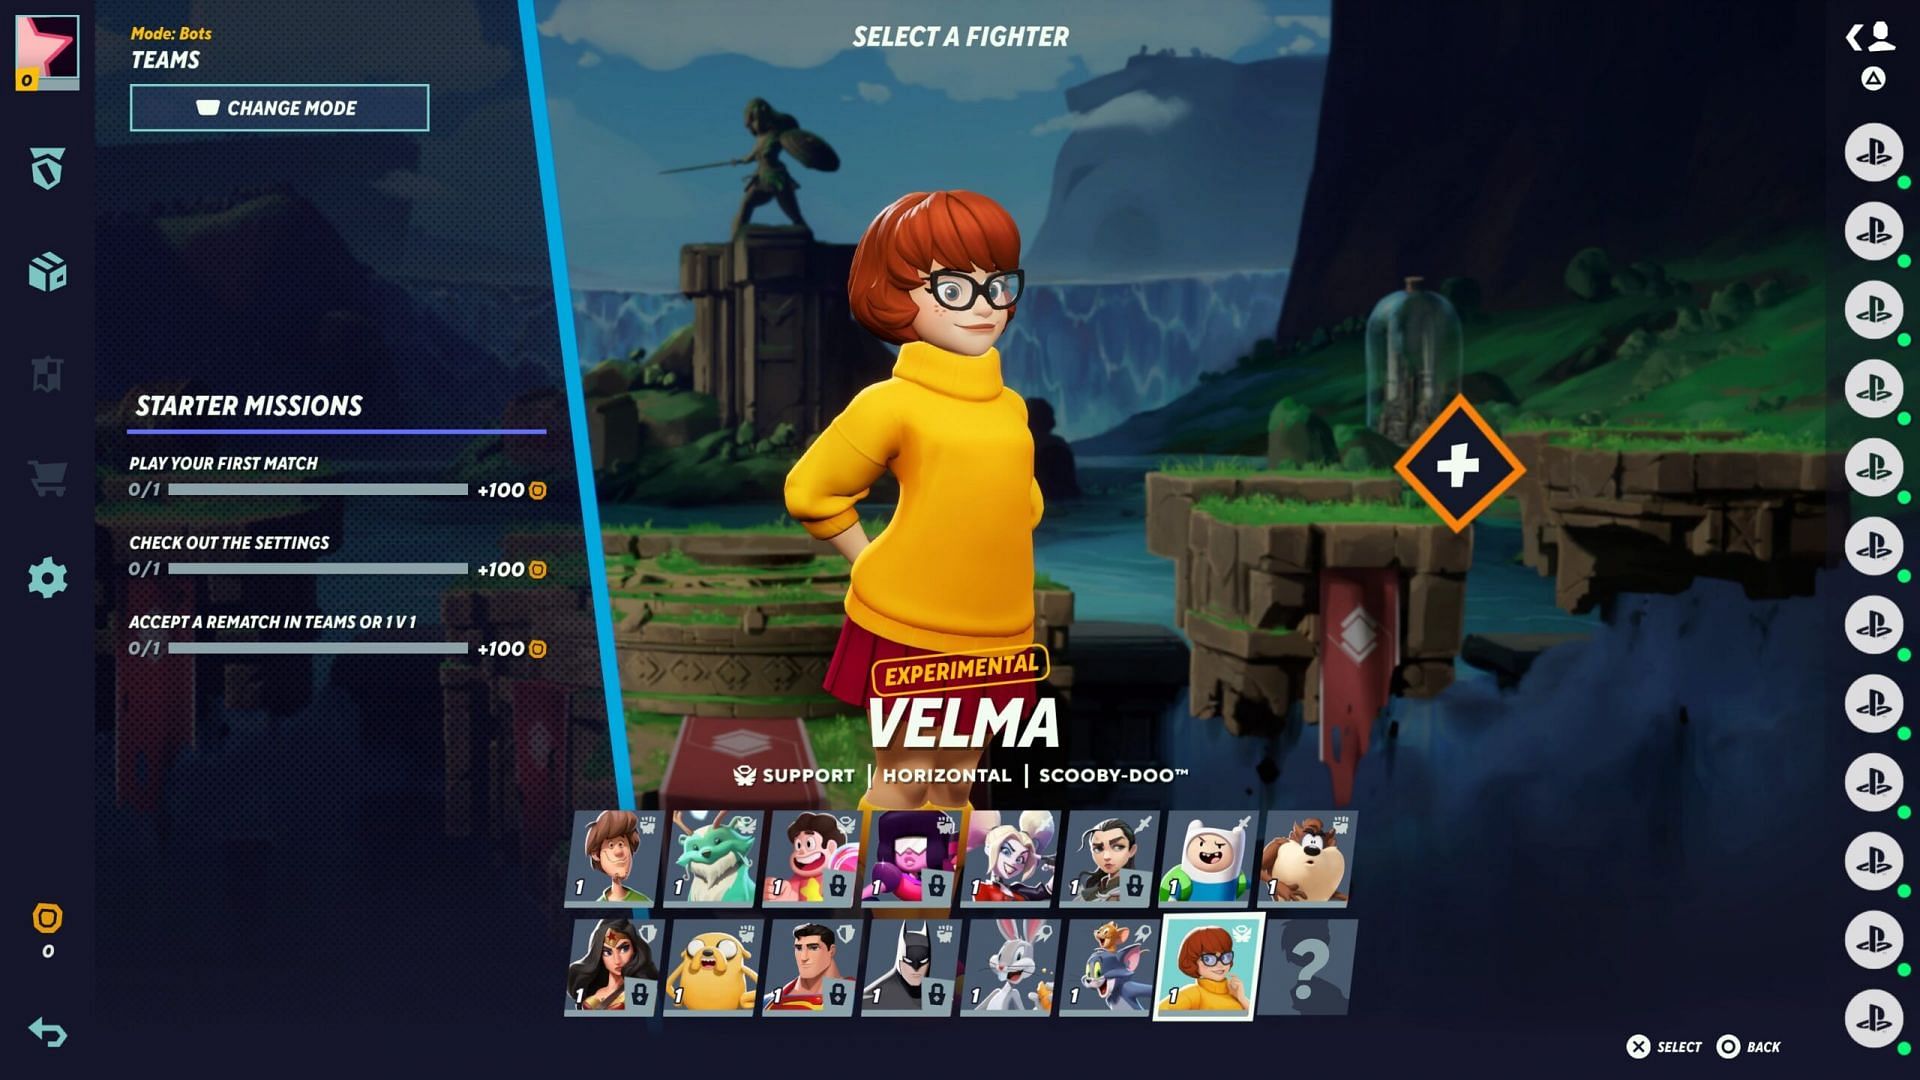 Velma, as she appears in the MultiVersus character select screen (Image via Warner Bros. Interactive Entertainment)